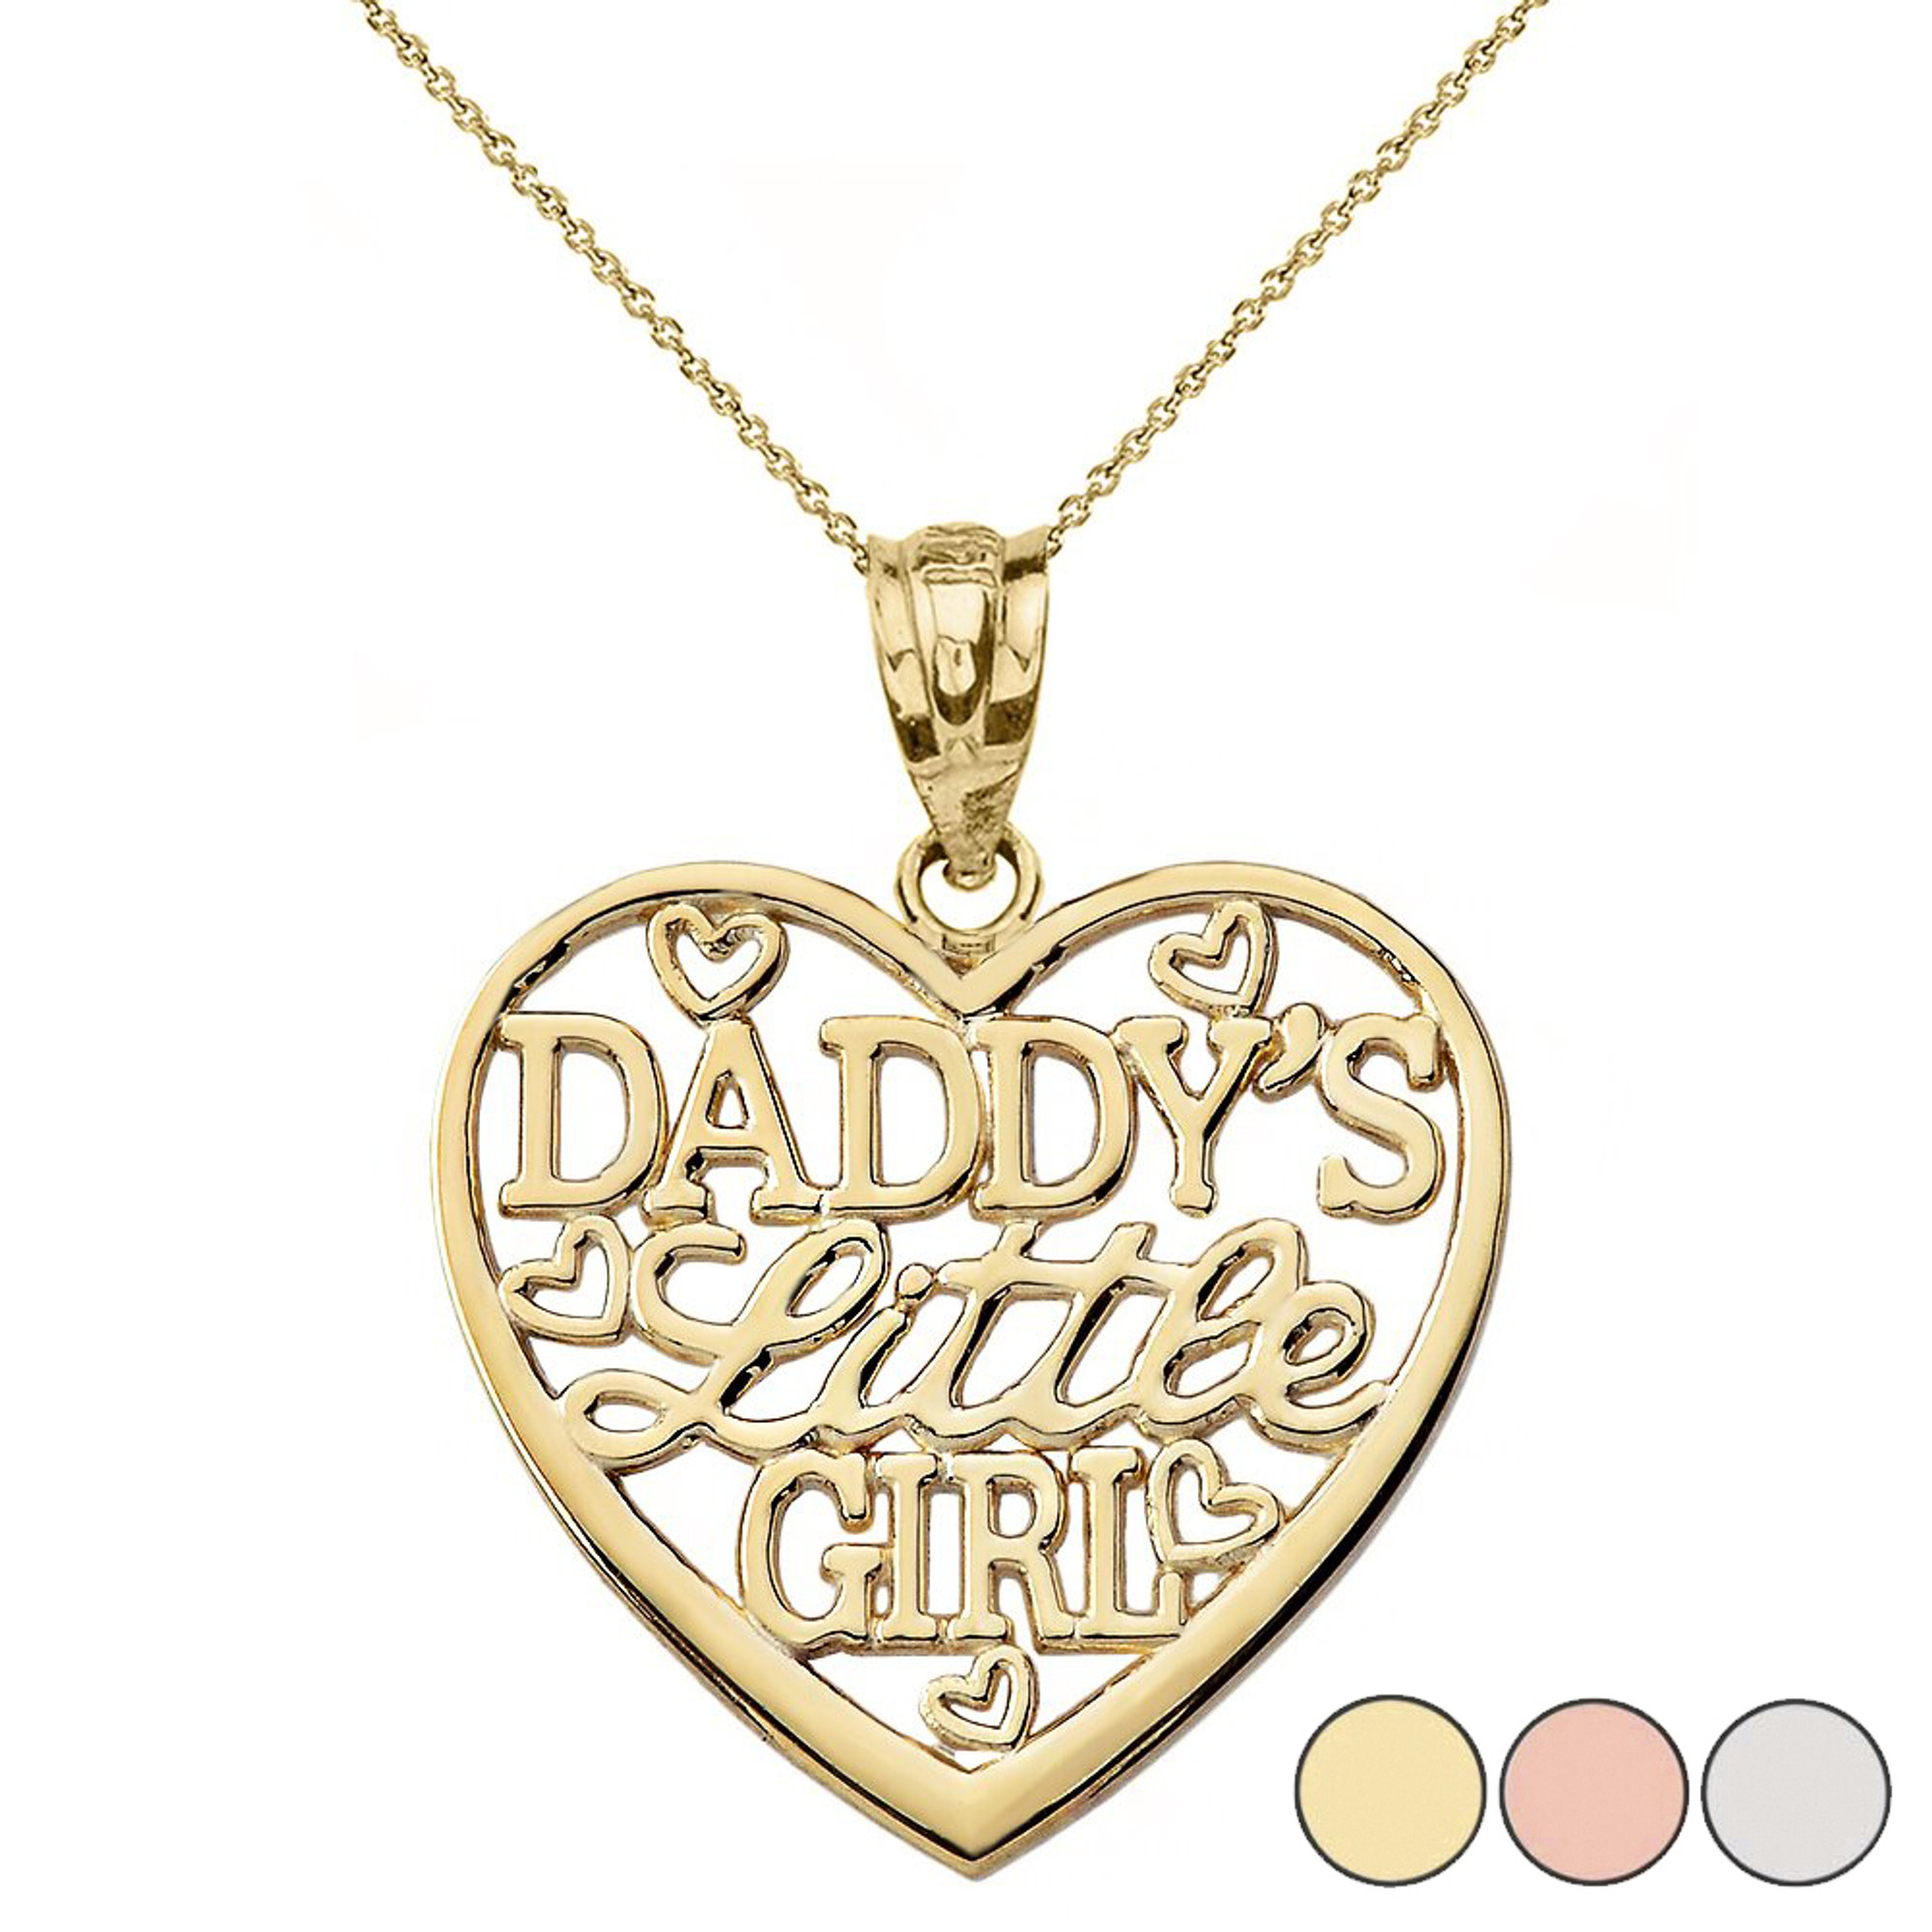 Daddy's Girl Heart Necklace - HAPPARY